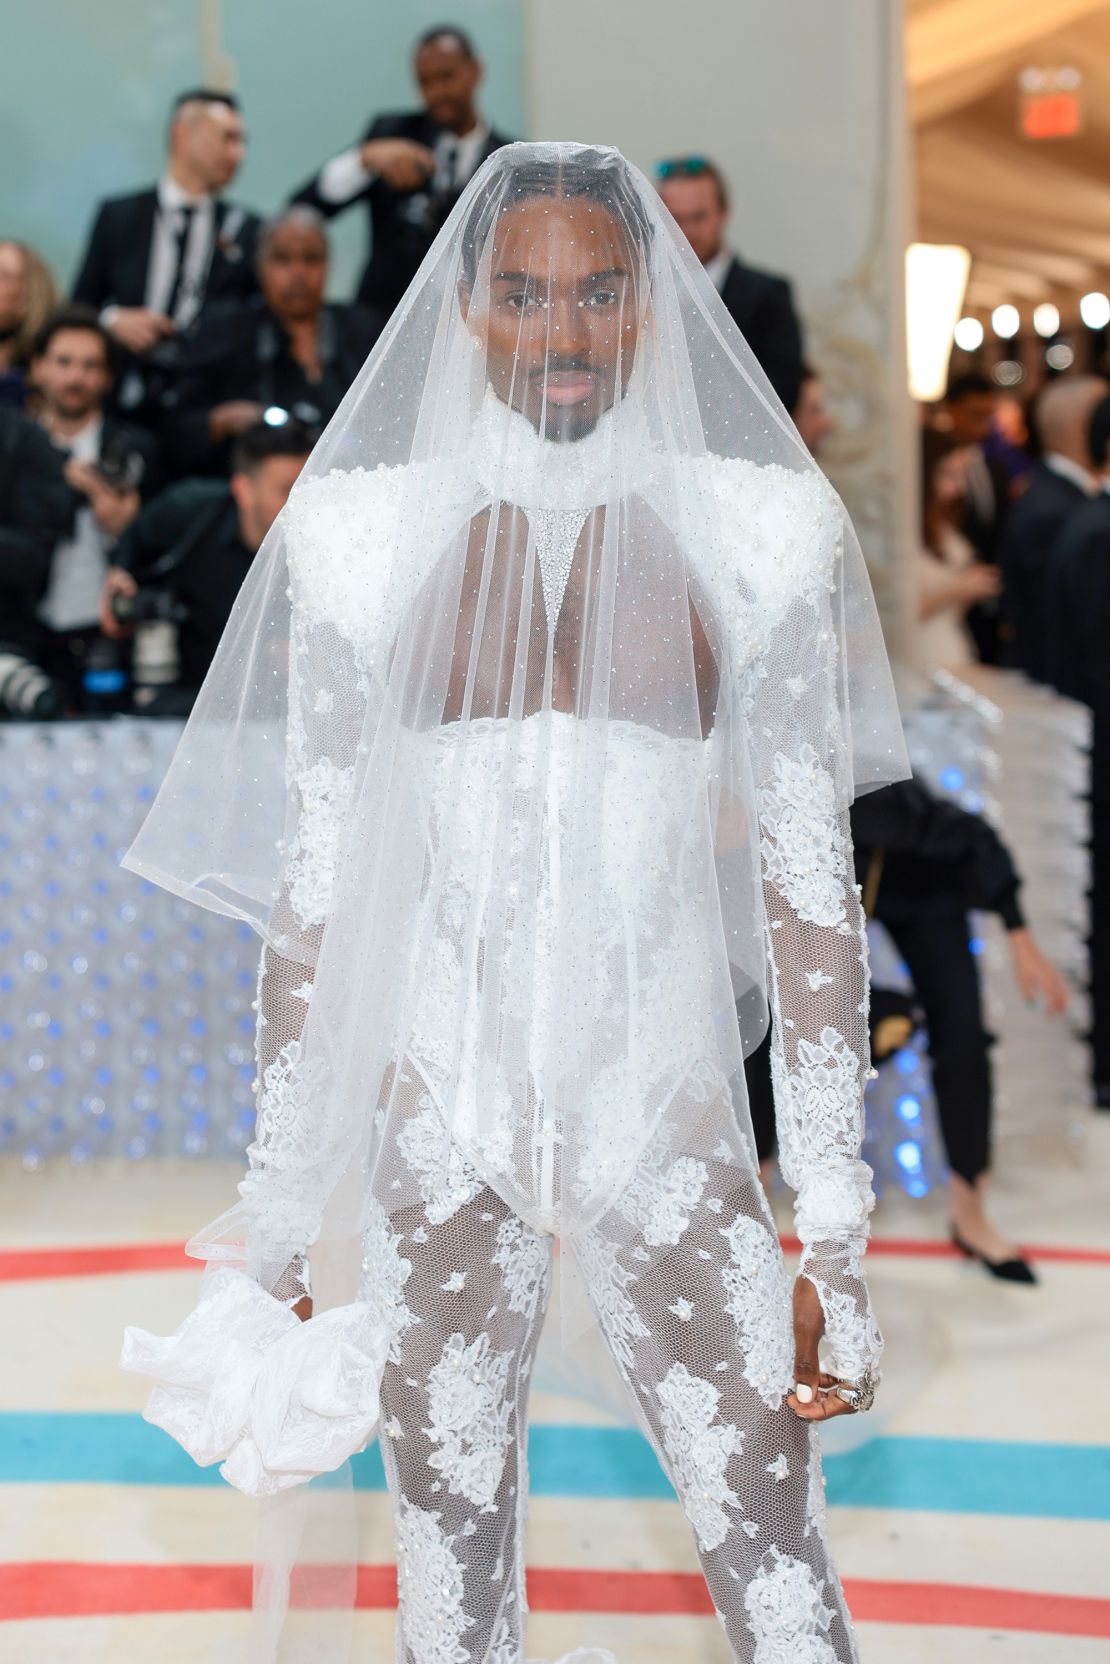 Model Alton Mason was the embodiment of the Chanel bride in head-to-toe lace and a long veil from the Karl Lagerfeld brand.